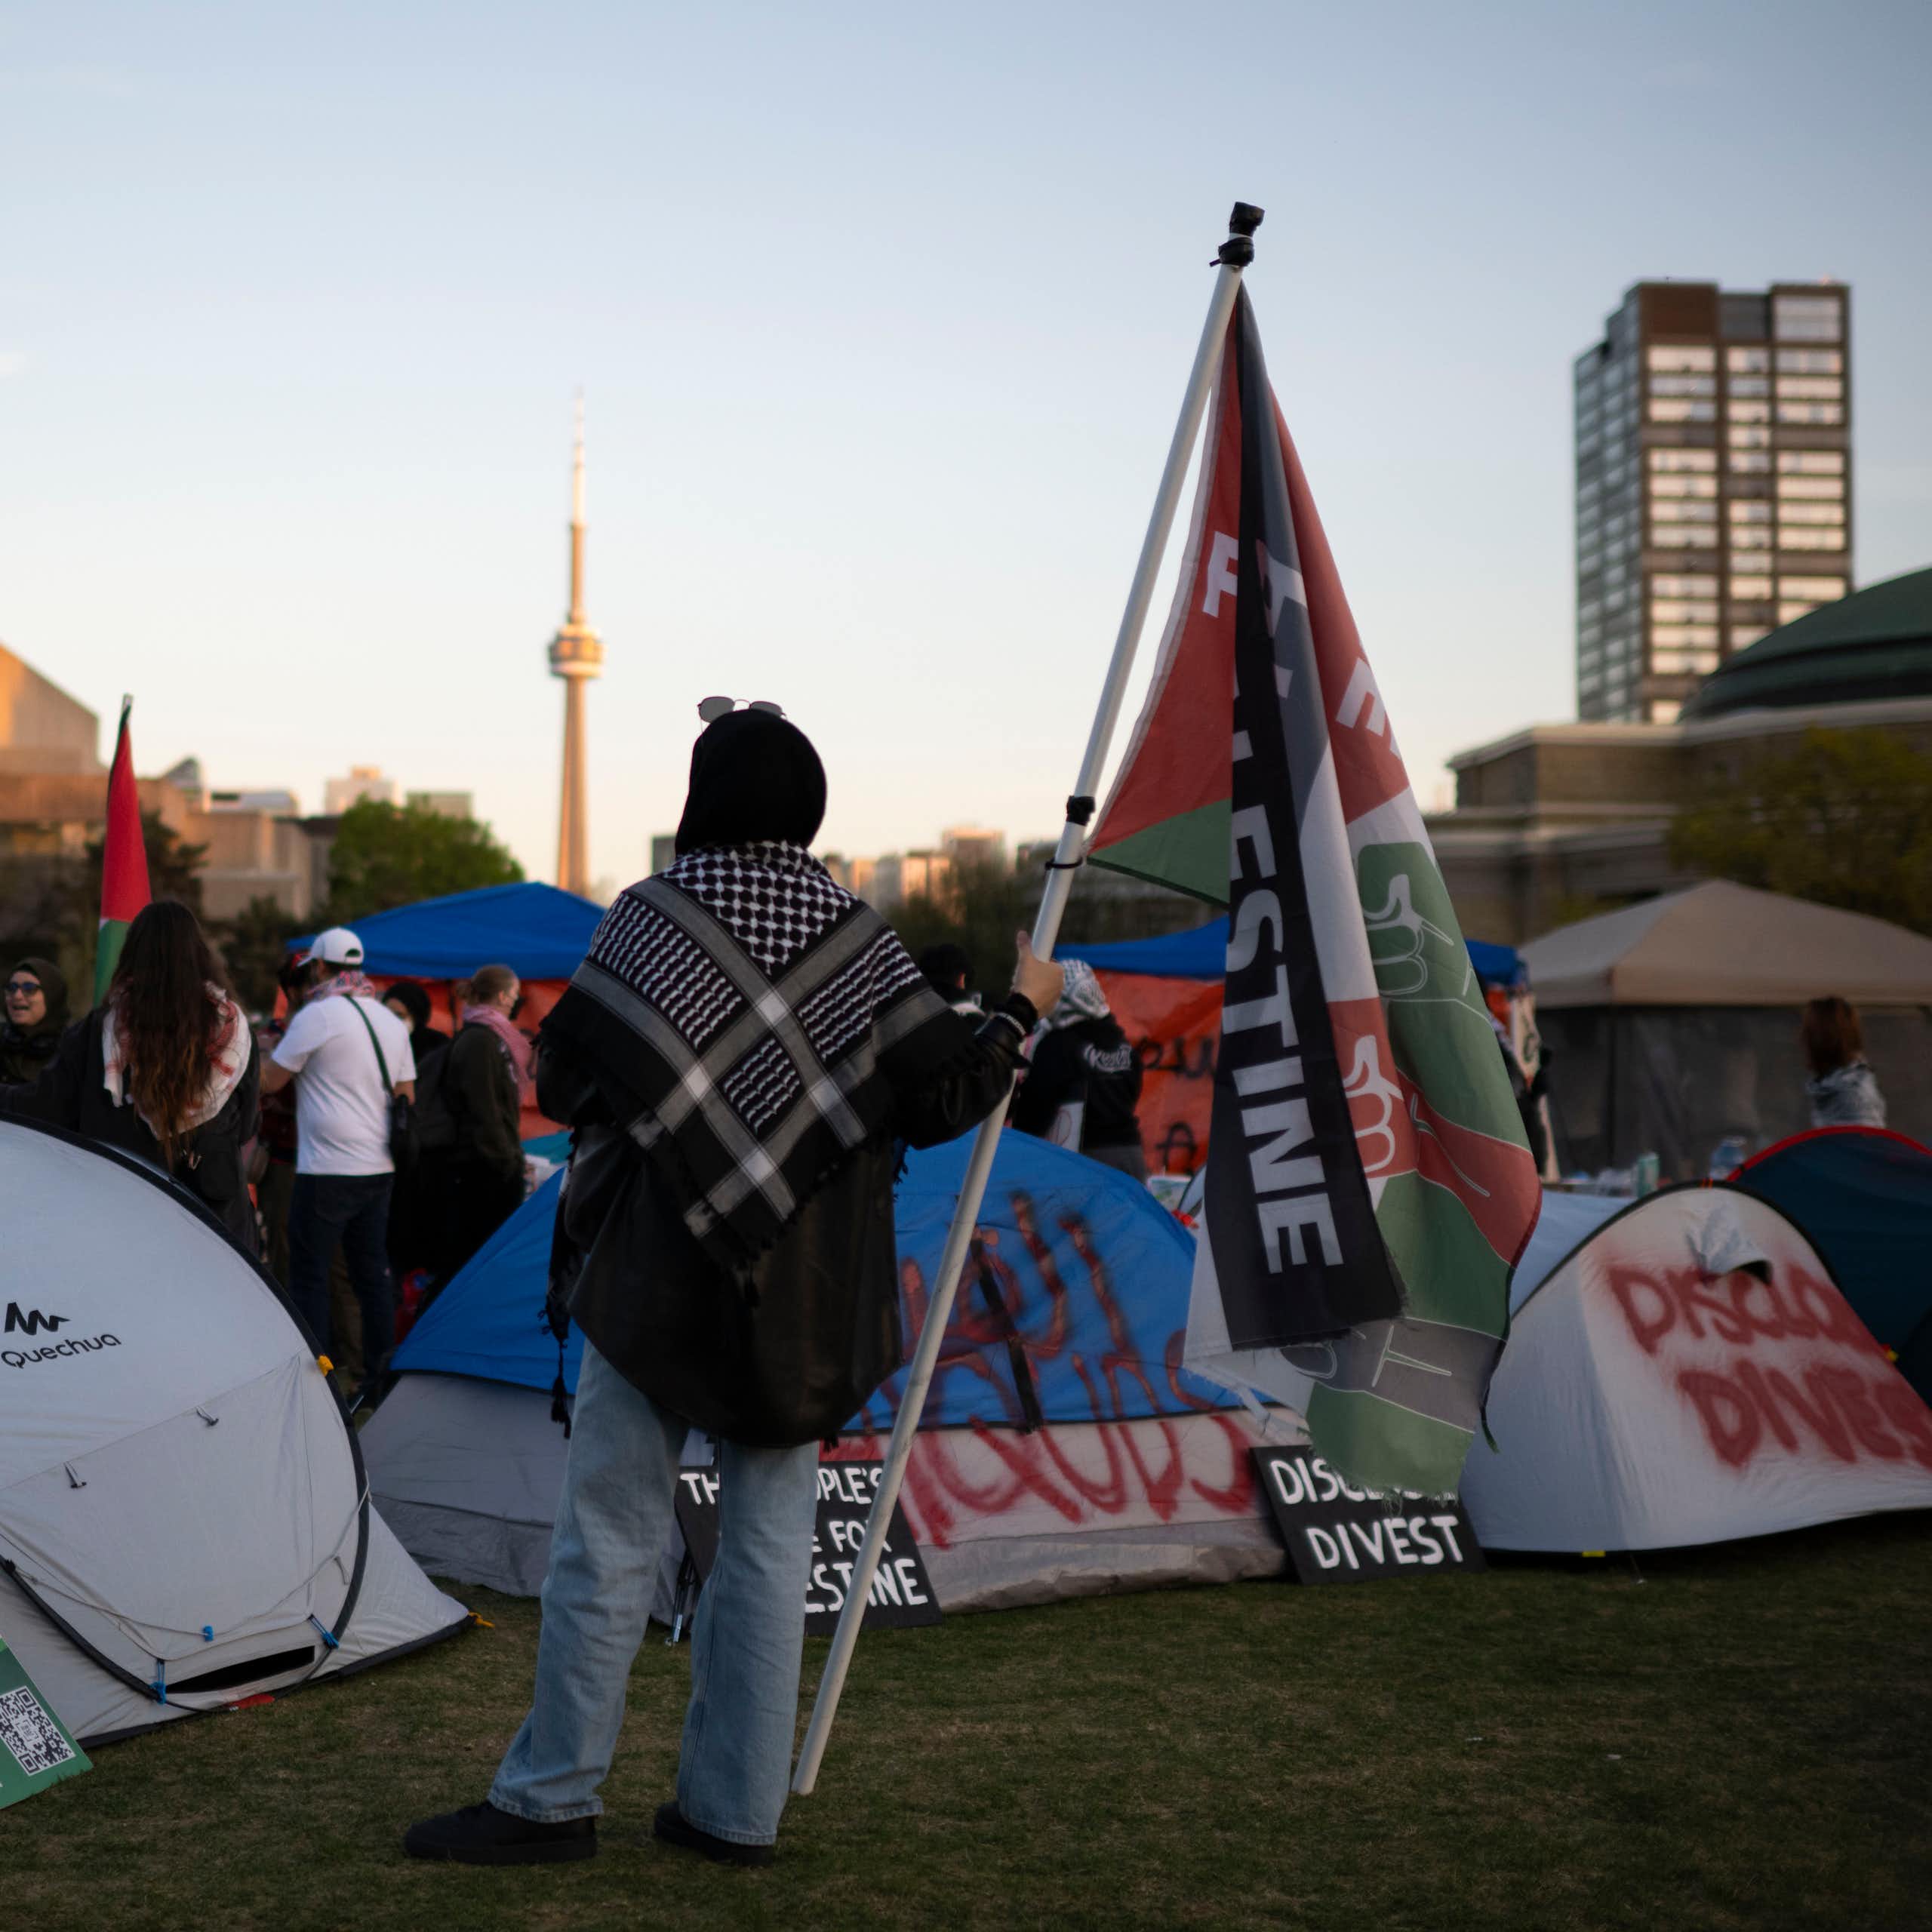 A person seen holding a flag with the end of the word 'Palestine' visible against tents and a Toronto skyline including the CN tower.